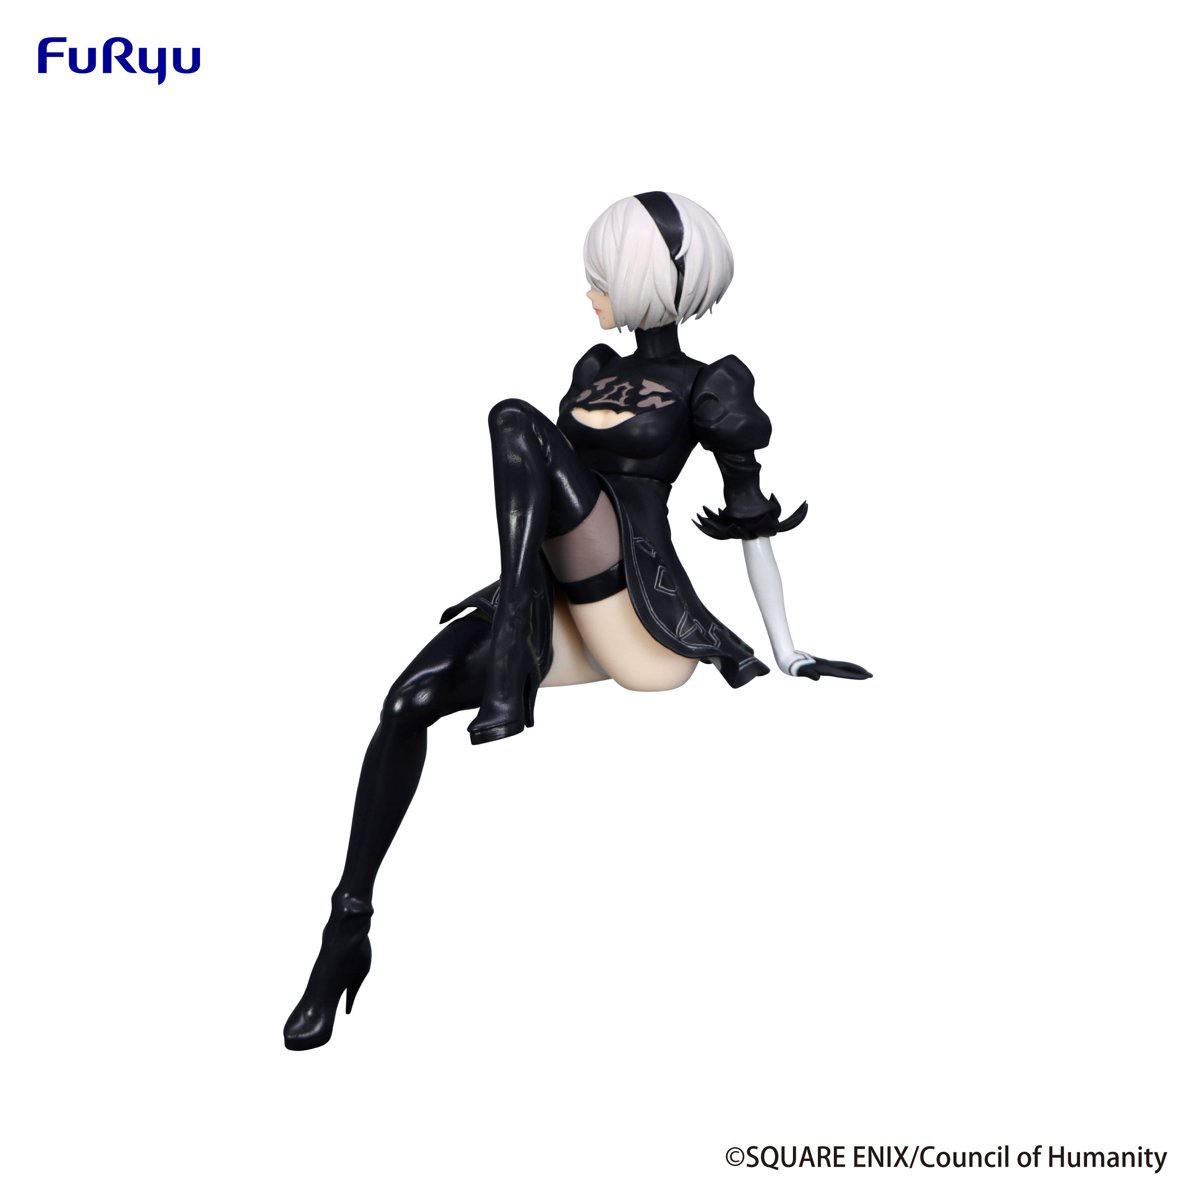 NieR:Automata Ver1.1a - Noodle Stopper Figure -2B- (YoRHa No.2 Type B) up for preorder on Goodsmile ($33.99) bit.ly/4btdgoY